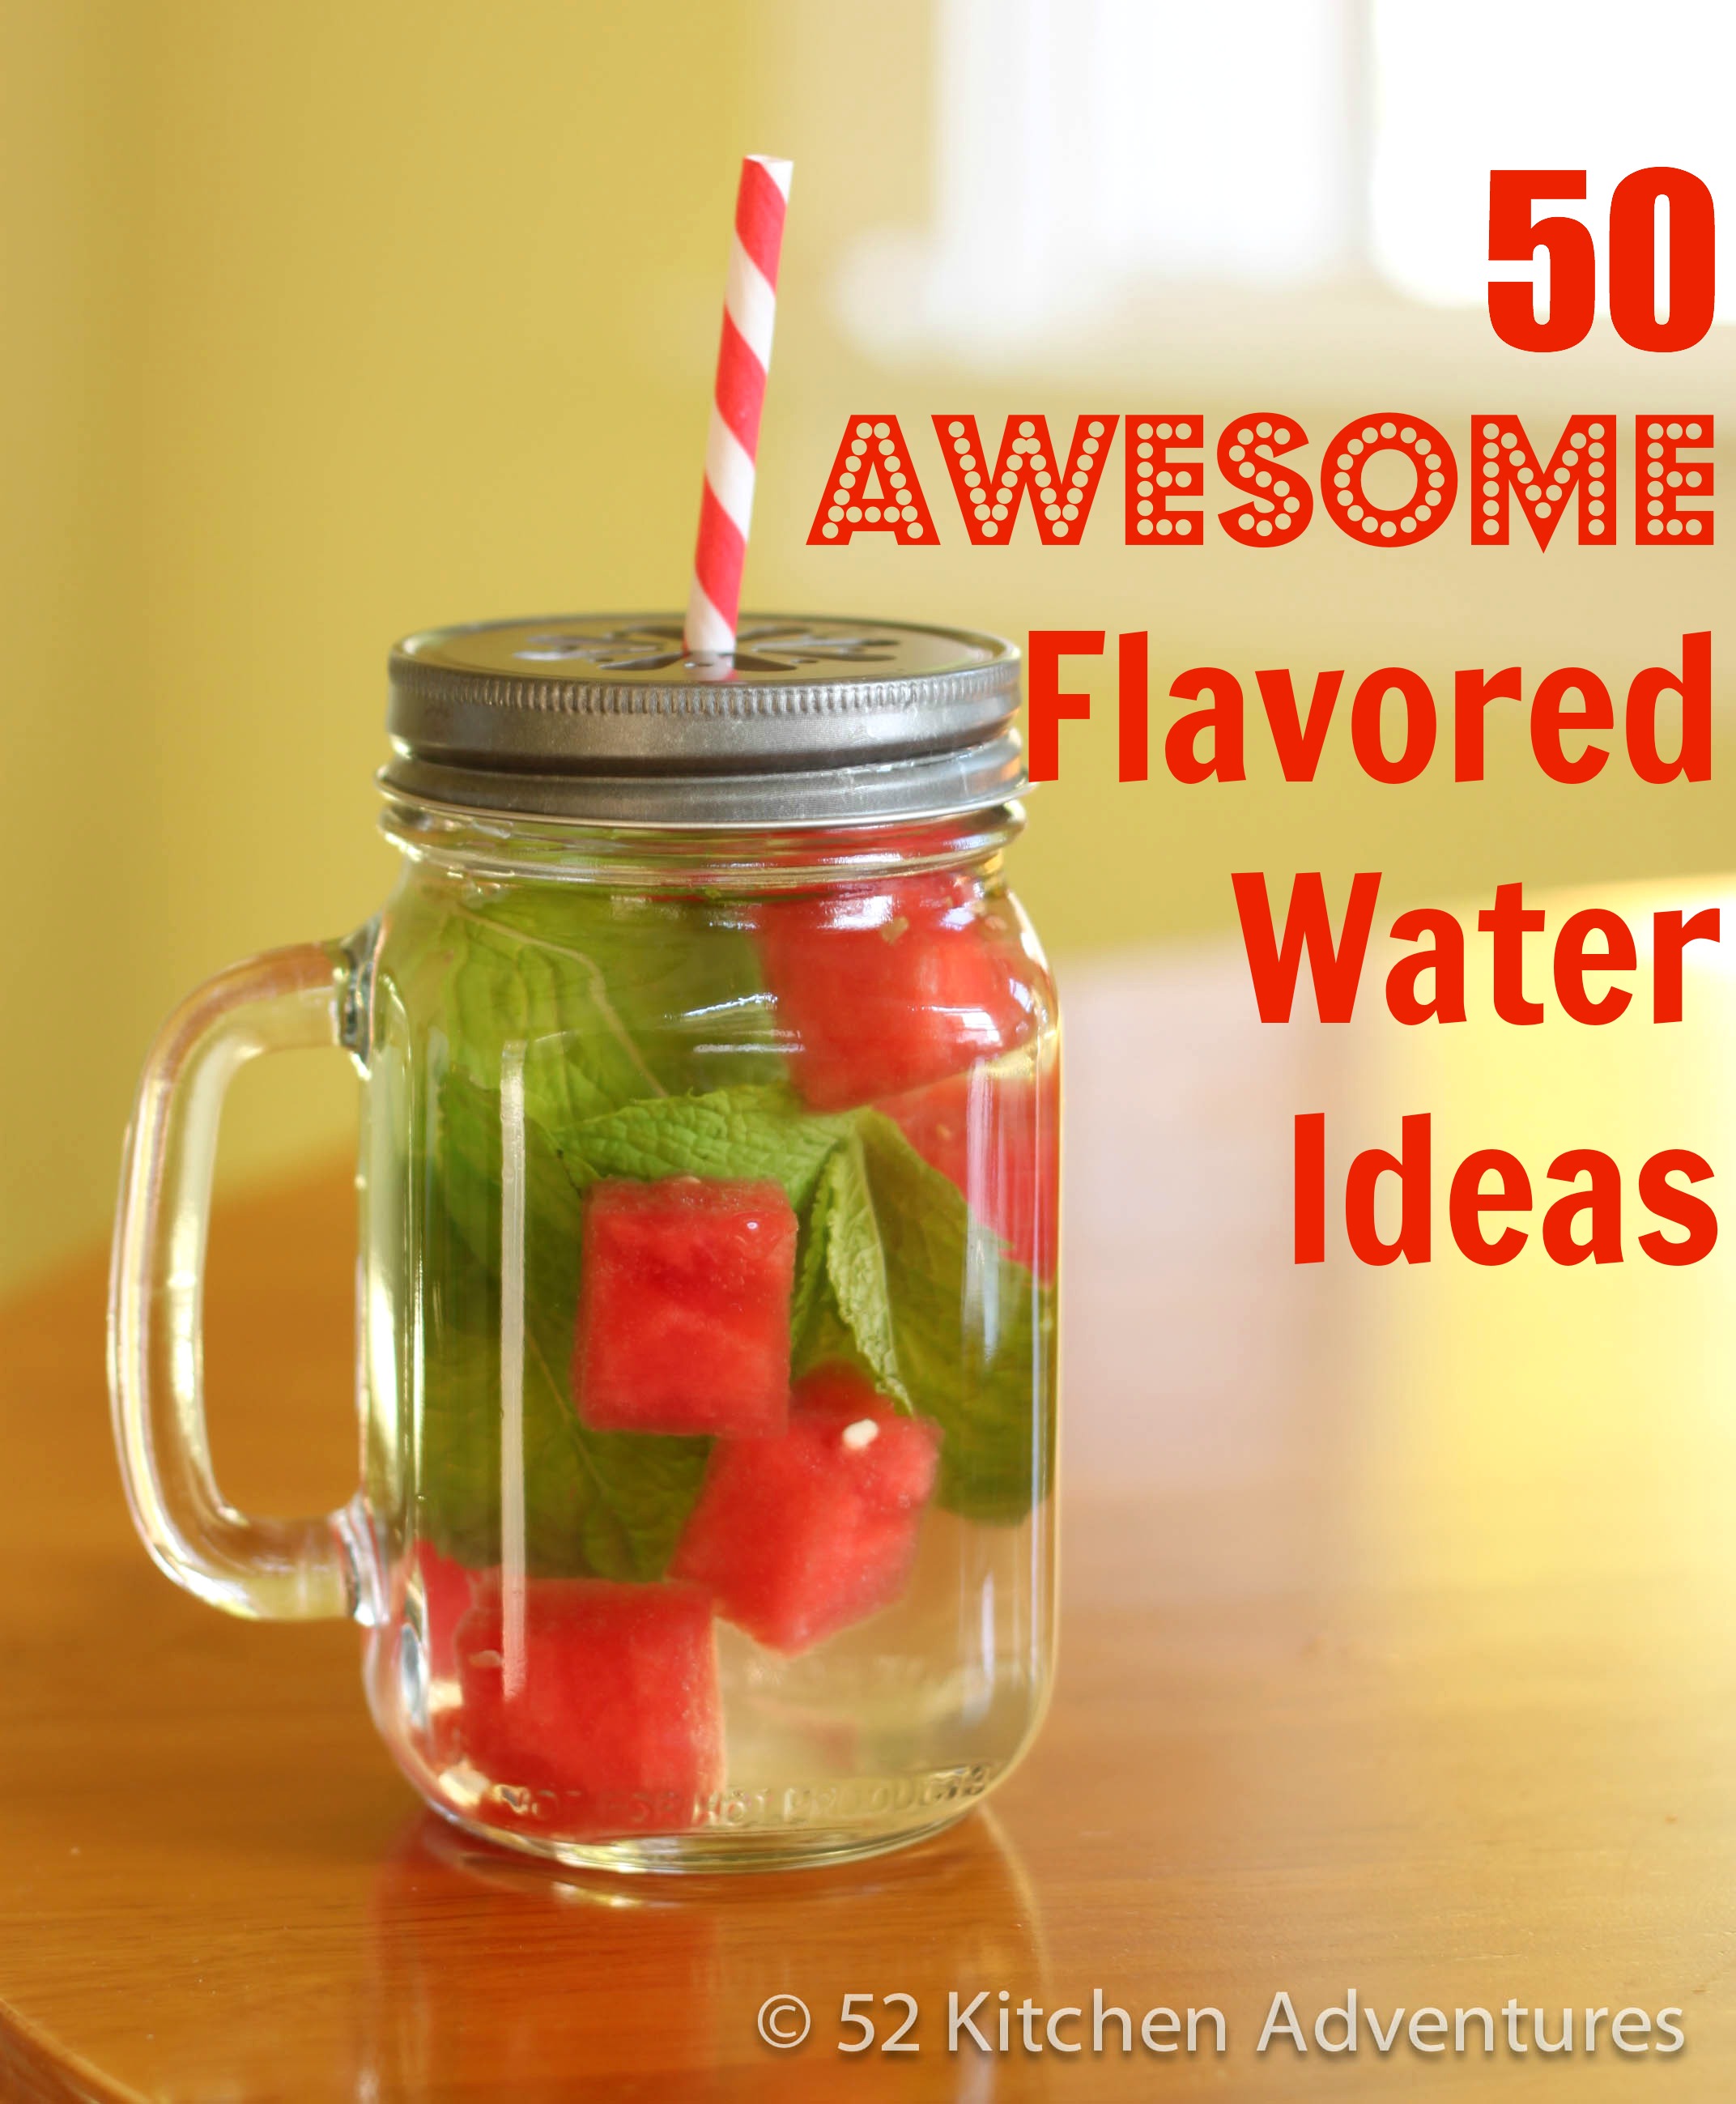 50 awesome flavored water ideas